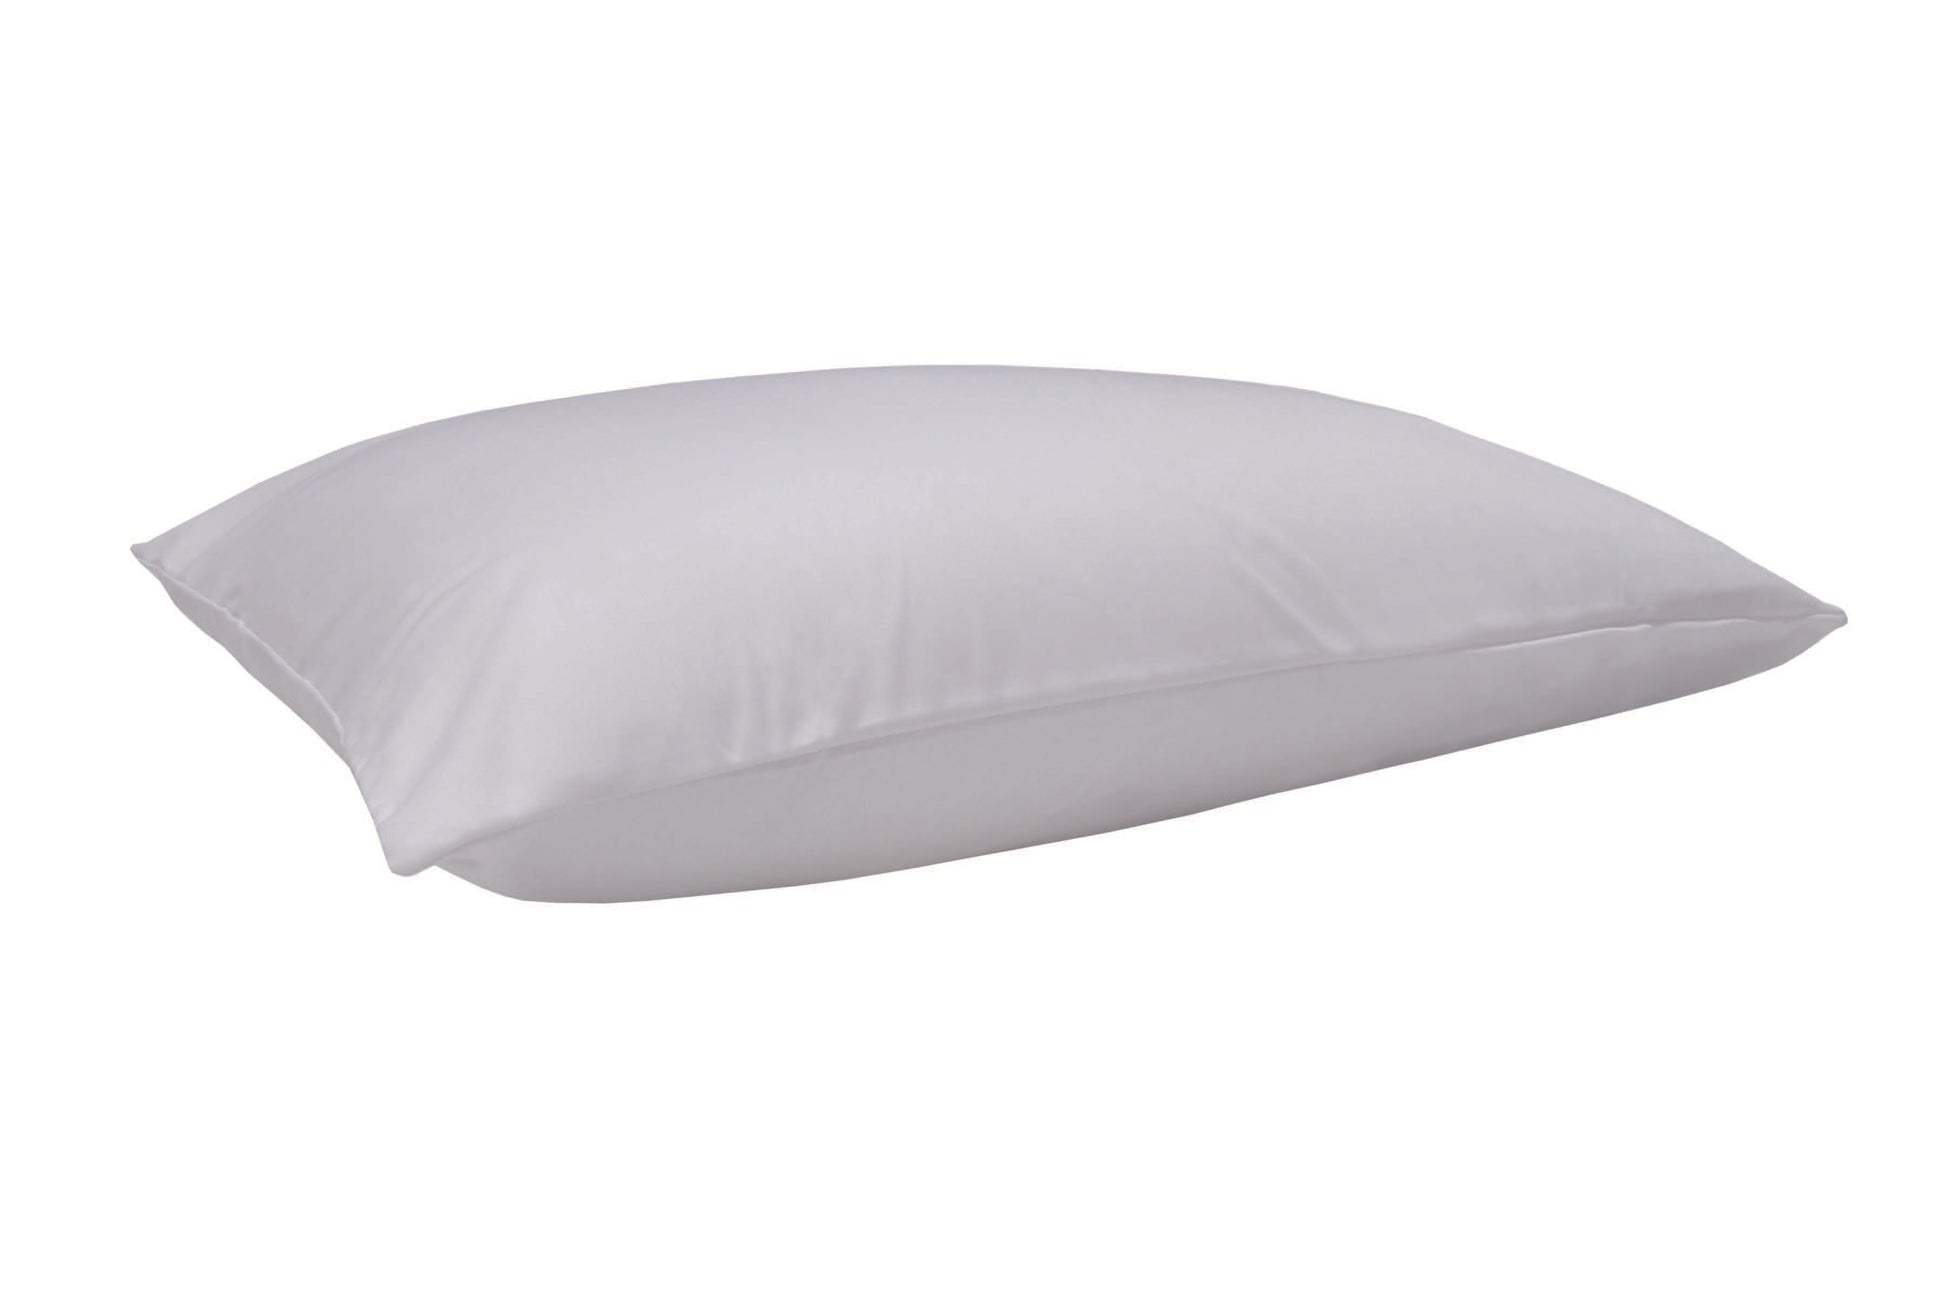 Bedgear Stretchwick Performance Pillow Protector - Image 2